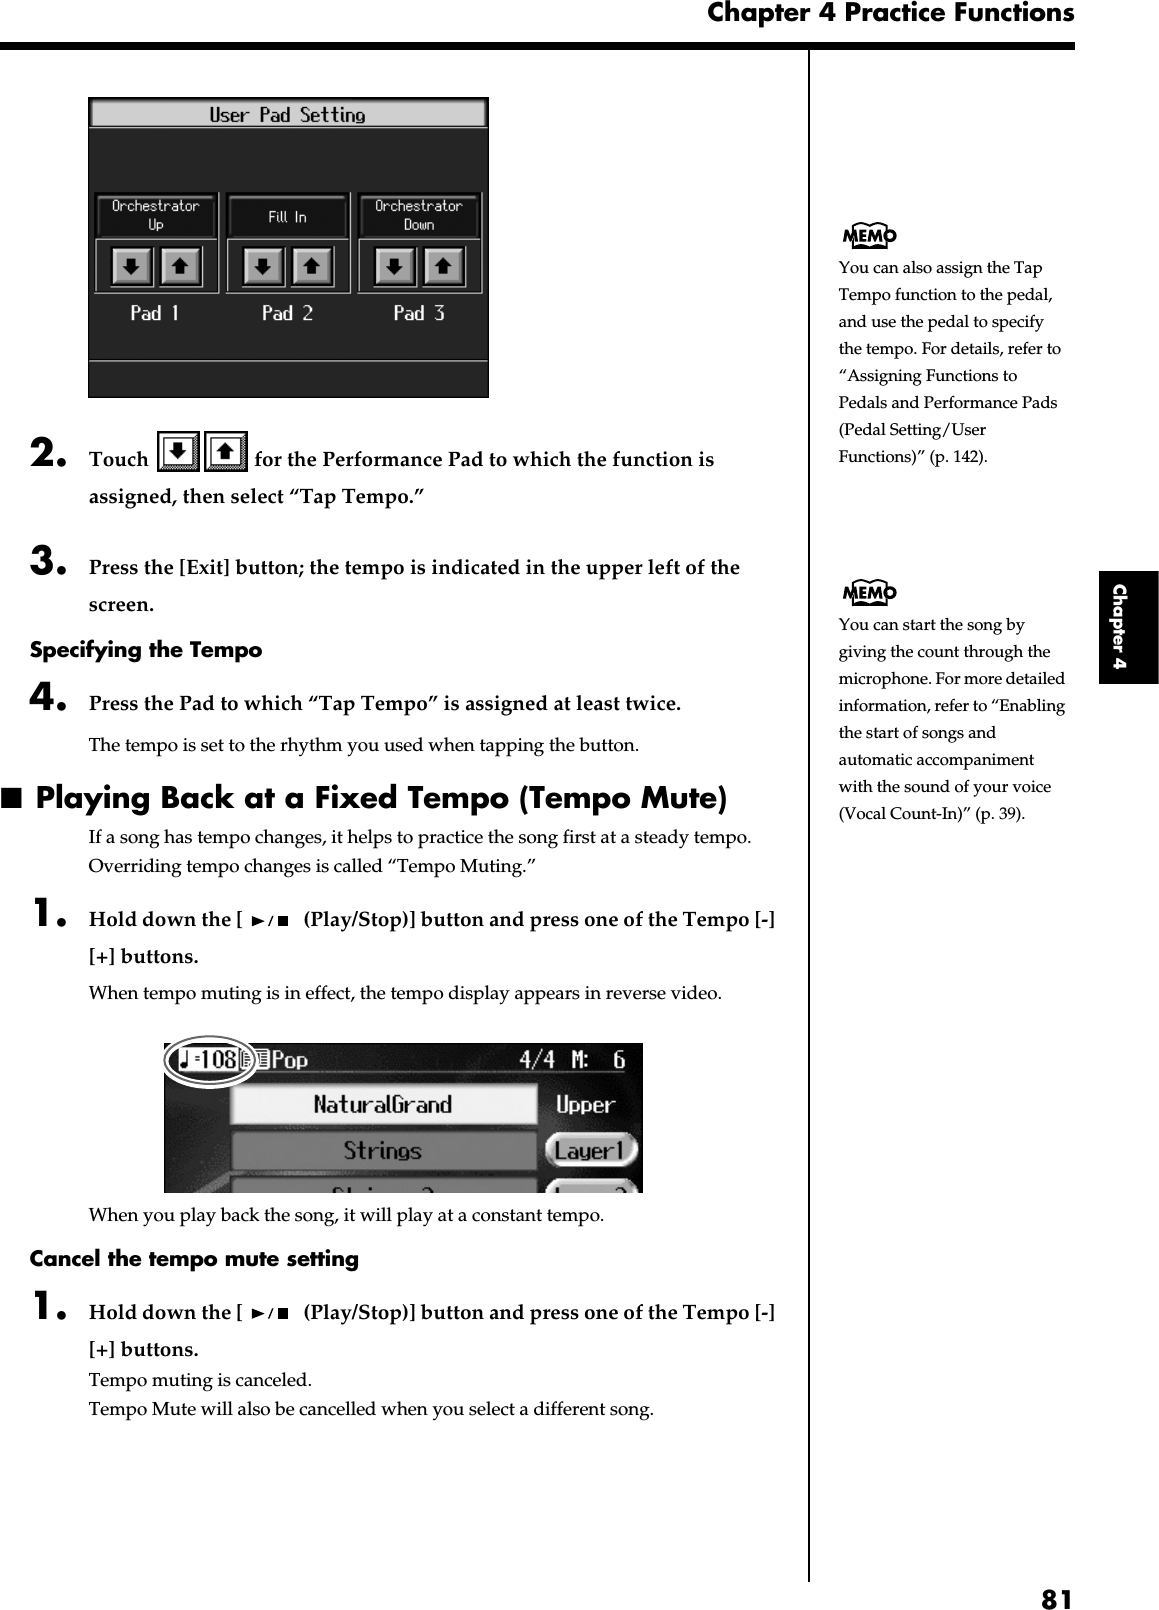 81Chapter 4 Practice FunctionsChapter 4fig.d-usrfunc.eps_602. Touch   for the Performance Pad to which the function is assigned, then select “Tap Tempo.”3. Press the [Exit] button; the tempo is indicated in the upper left of the screen.Specifying the Tempo4. Press the Pad to which “Tap Tempo” is assigned at least twice.The tempo is set to the rhythm you used when tapping the button.■Playing Back at a Fixed Tempo (Tempo Mute)If a song has tempo changes, it helps to practice the song first at a steady tempo. Overriding tempo changes is called “Tempo Muting.”1. Hold down the [  (Play/Stop)] button and press one of the Tempo [-] [+] buttons.When tempo muting is in effect, the tempo display appears in reverse video.fig.d-tempmute.eps_60When you play back the song, it will play at a constant tempo.Cancel the tempo mute setting1. Hold down the [  (Play/Stop)] button and press one of the Tempo [-] [+] buttons.Tempo muting is canceled.Tempo Mute will also be cancelled when you select a different song.You can also assign the Tap Tempo function to the pedal, and use the pedal to specify the tempo. For details, refer to “Assigning Functions to Pedals and Performance Pads (Pedal Setting/User Functions)” (p. 142).You can start the song by giving the count through the microphone. For more detailed information, refer to “Enabling the start of songs and automatic accompaniment with the sound of your voice (Vocal Count-In)” (p. 39).